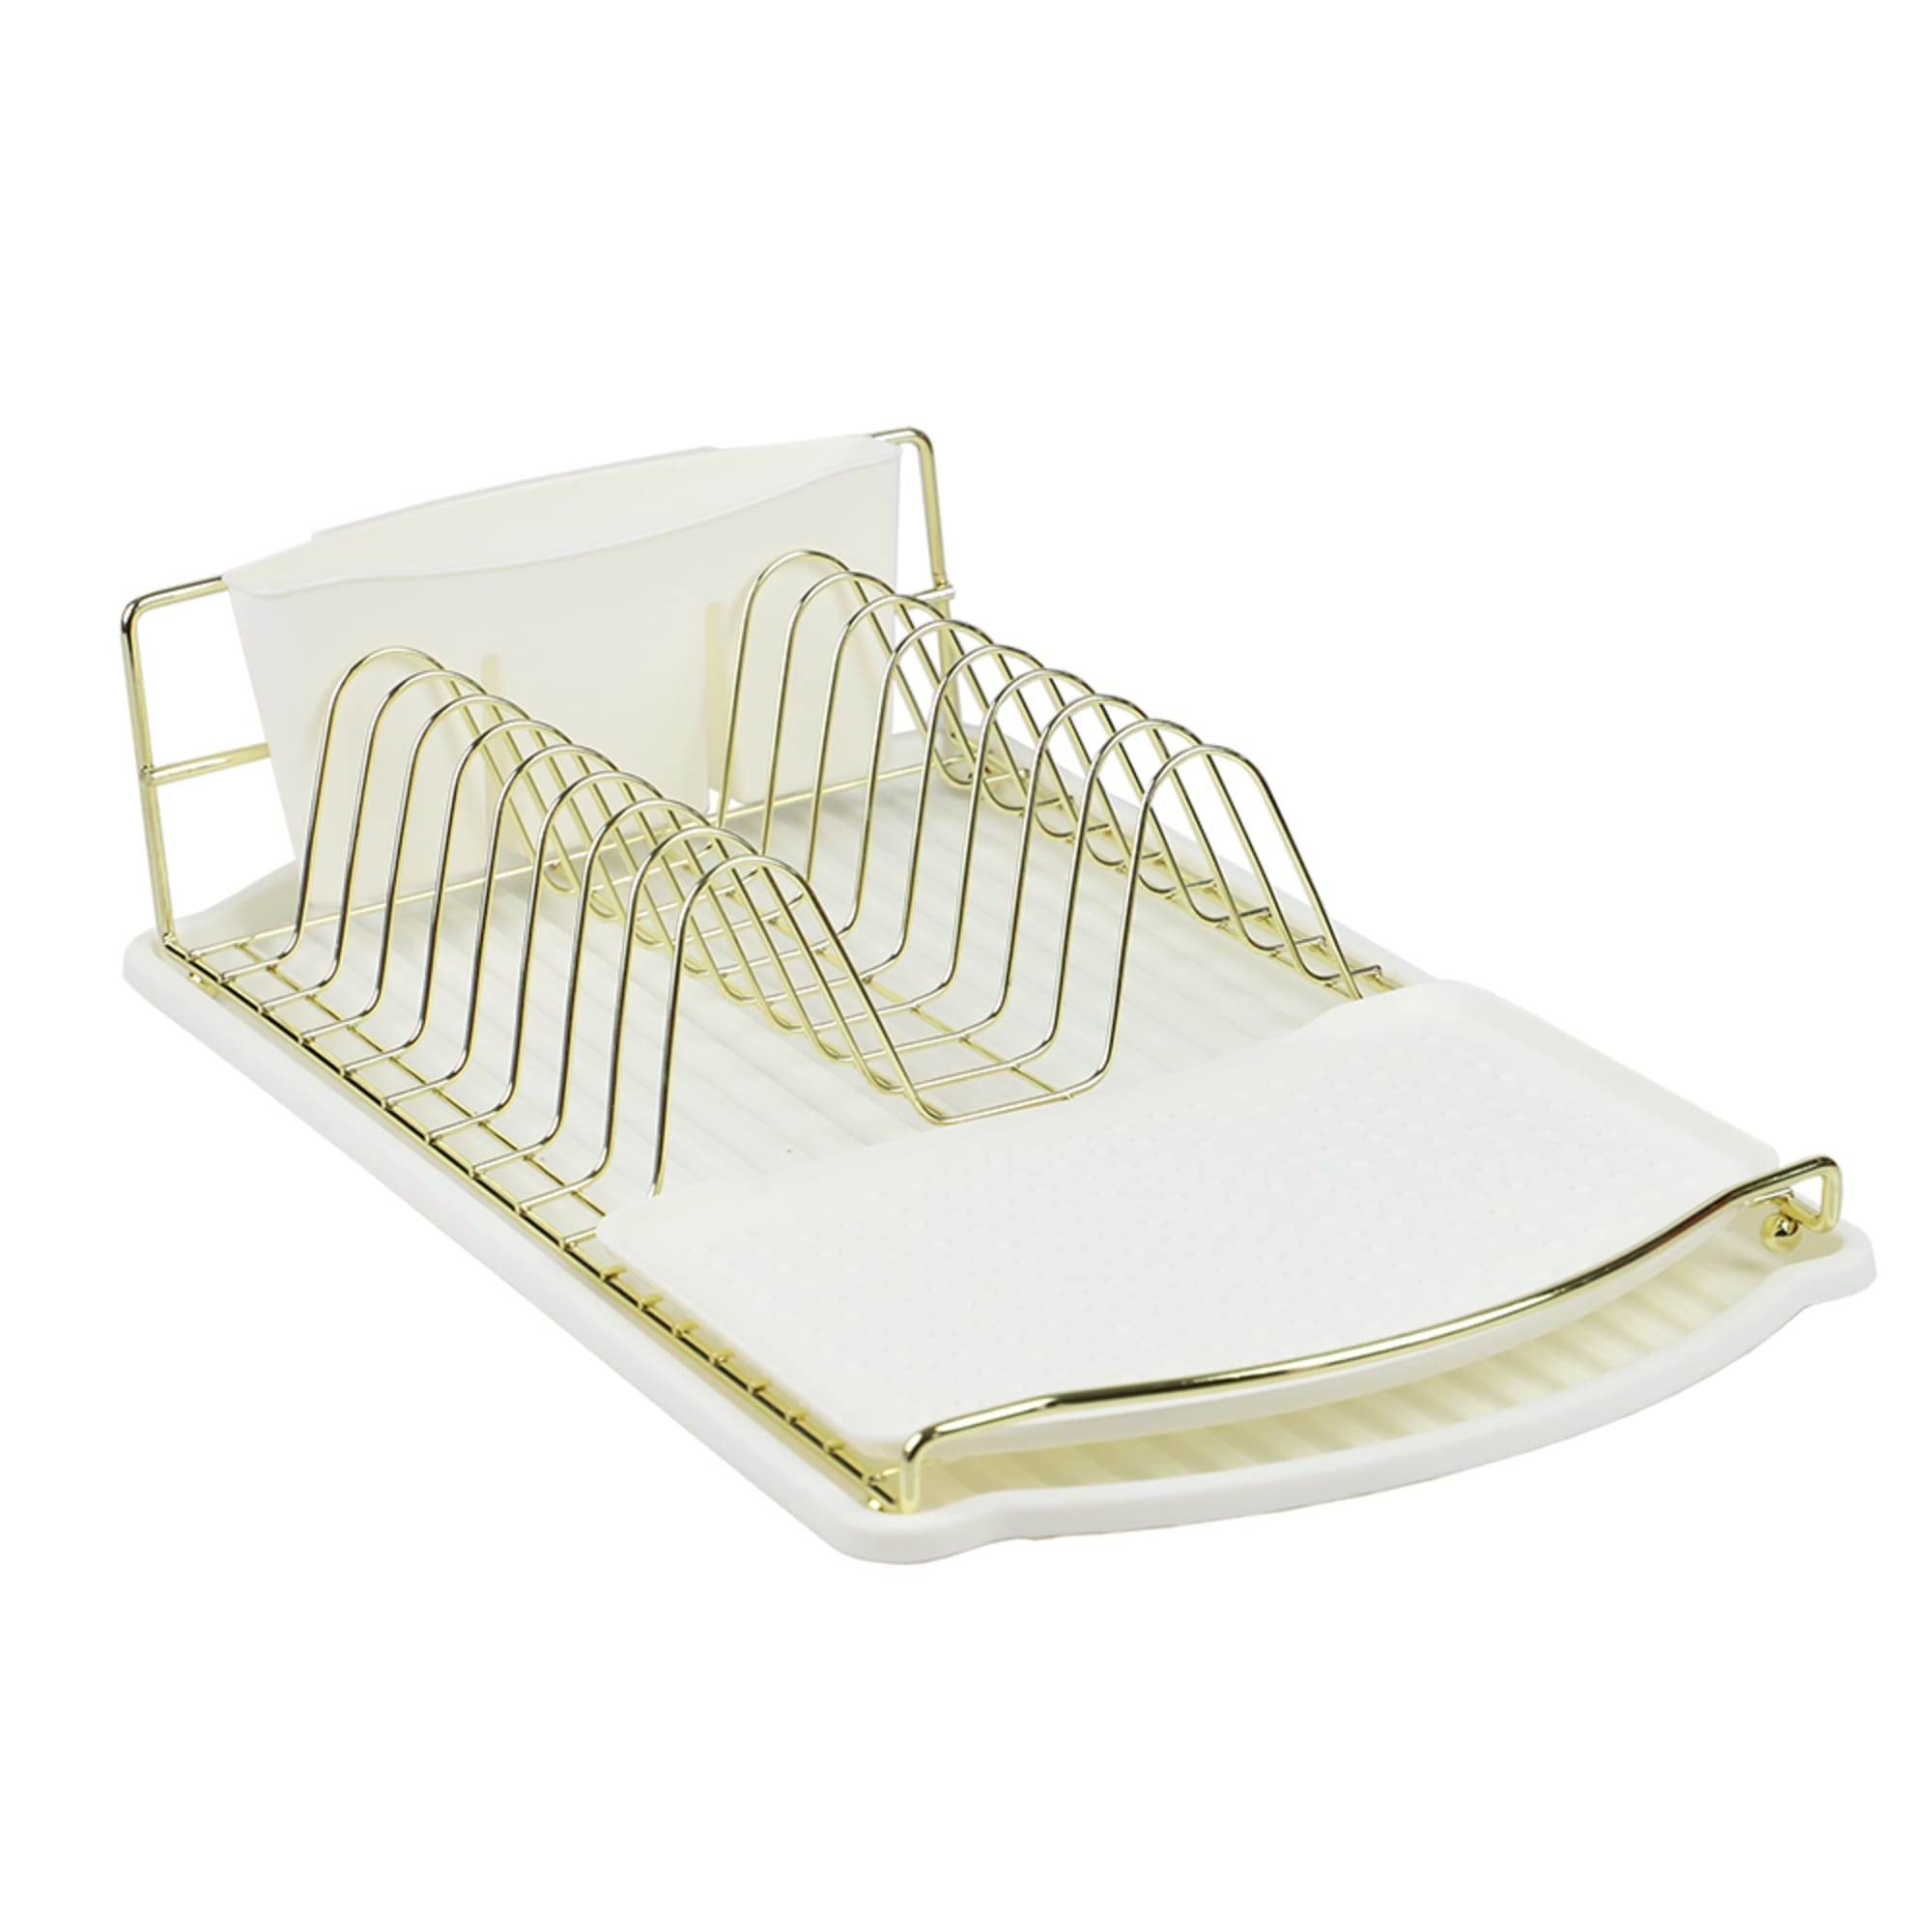 Michael Graves Design Gold Finish Steel Wire Compact Dish Rack with Oversized Utensil Holder, White $12.00 EACH, CASE PACK OF 6